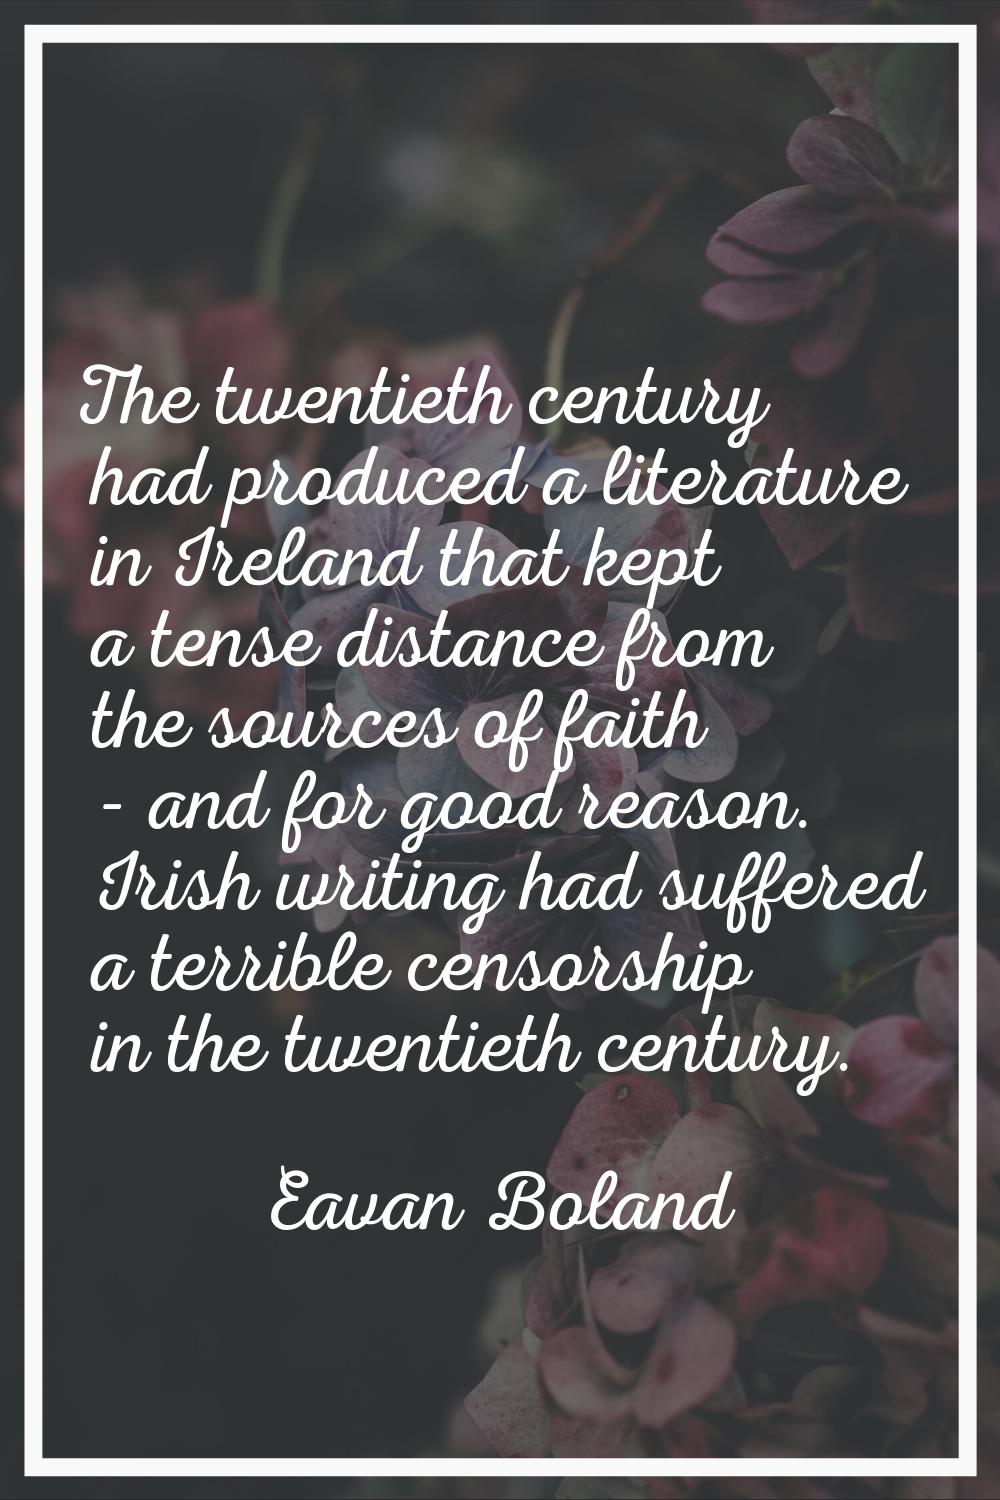 The twentieth century had produced a literature in Ireland that kept a tense distance from the sour